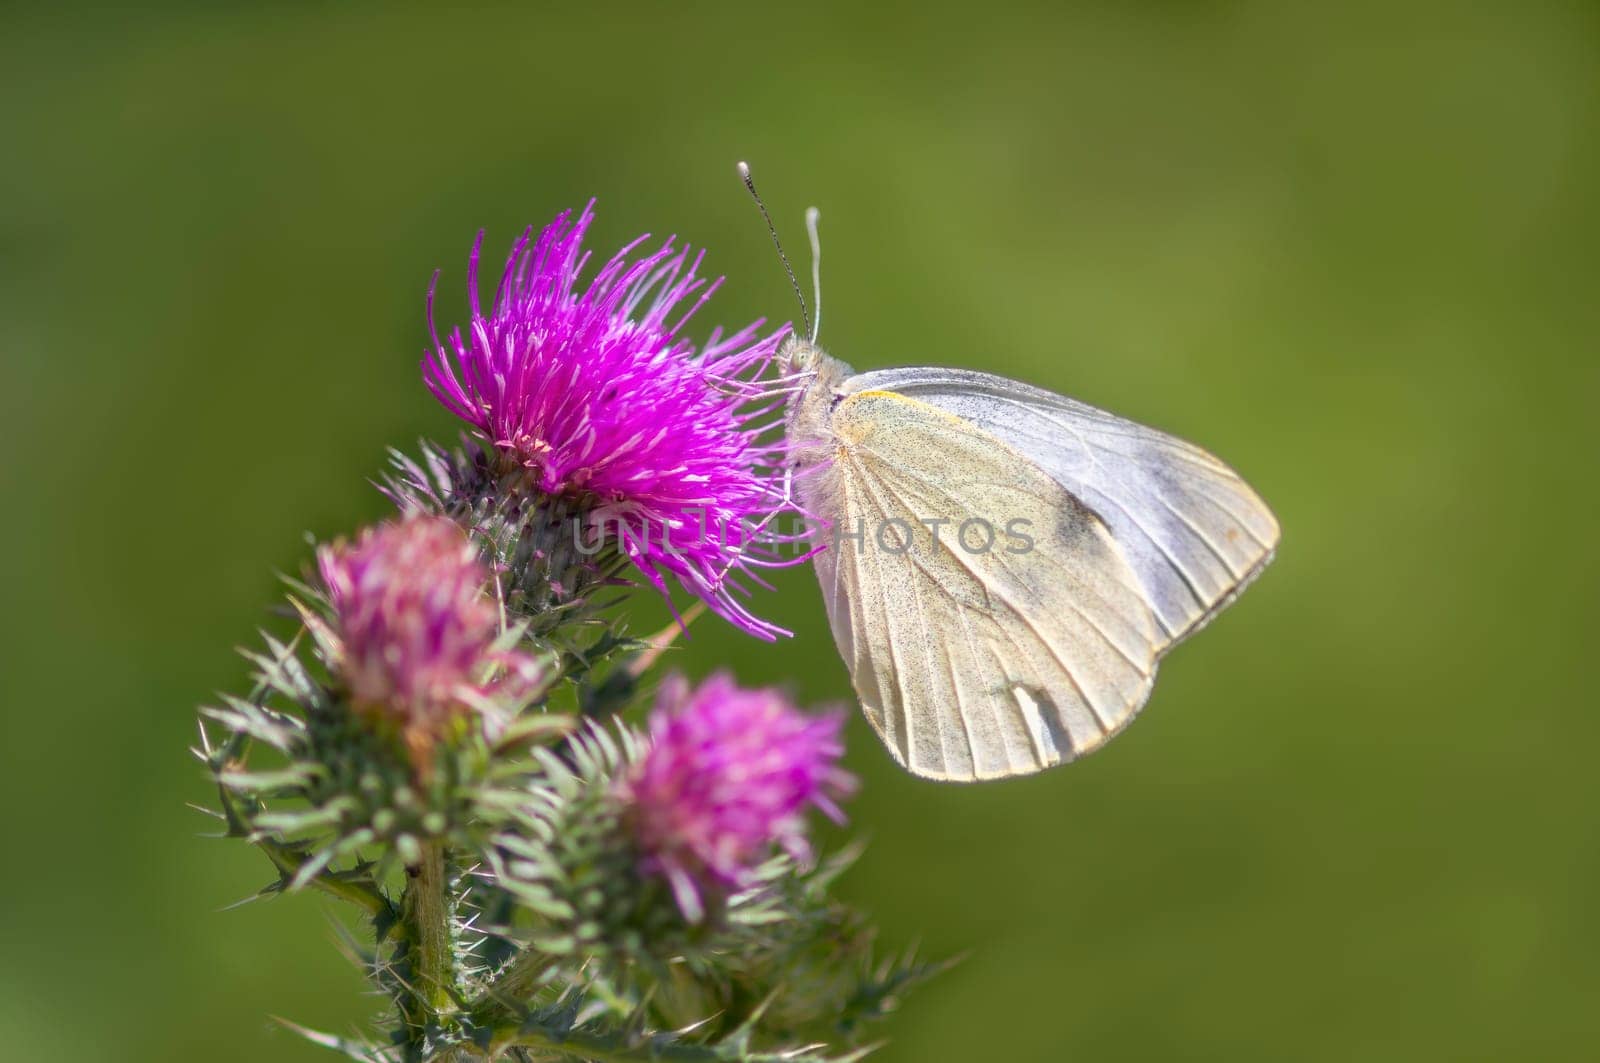 butterfly sits on a flower and nibbles necktar by mario_plechaty_photography